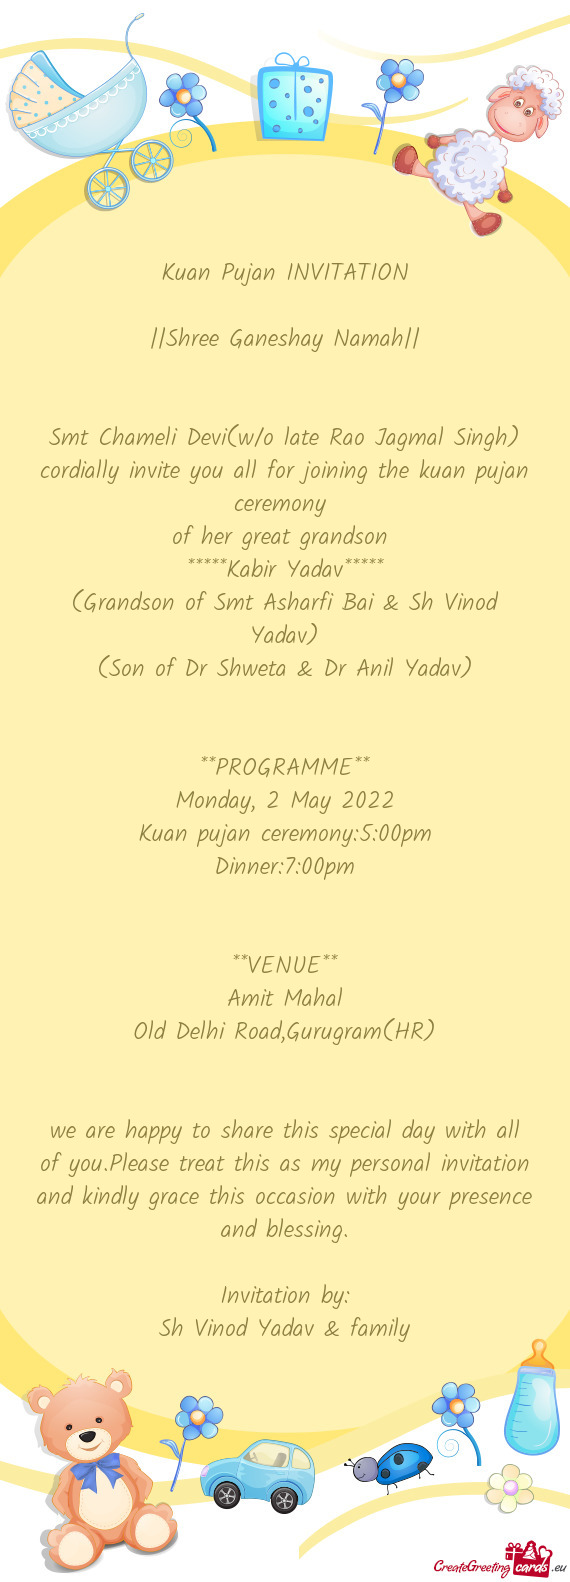 Smt Chameli Devi(w/o late Rao Jagmal Singh) cordially invite you all for joining the kuan pujan cere